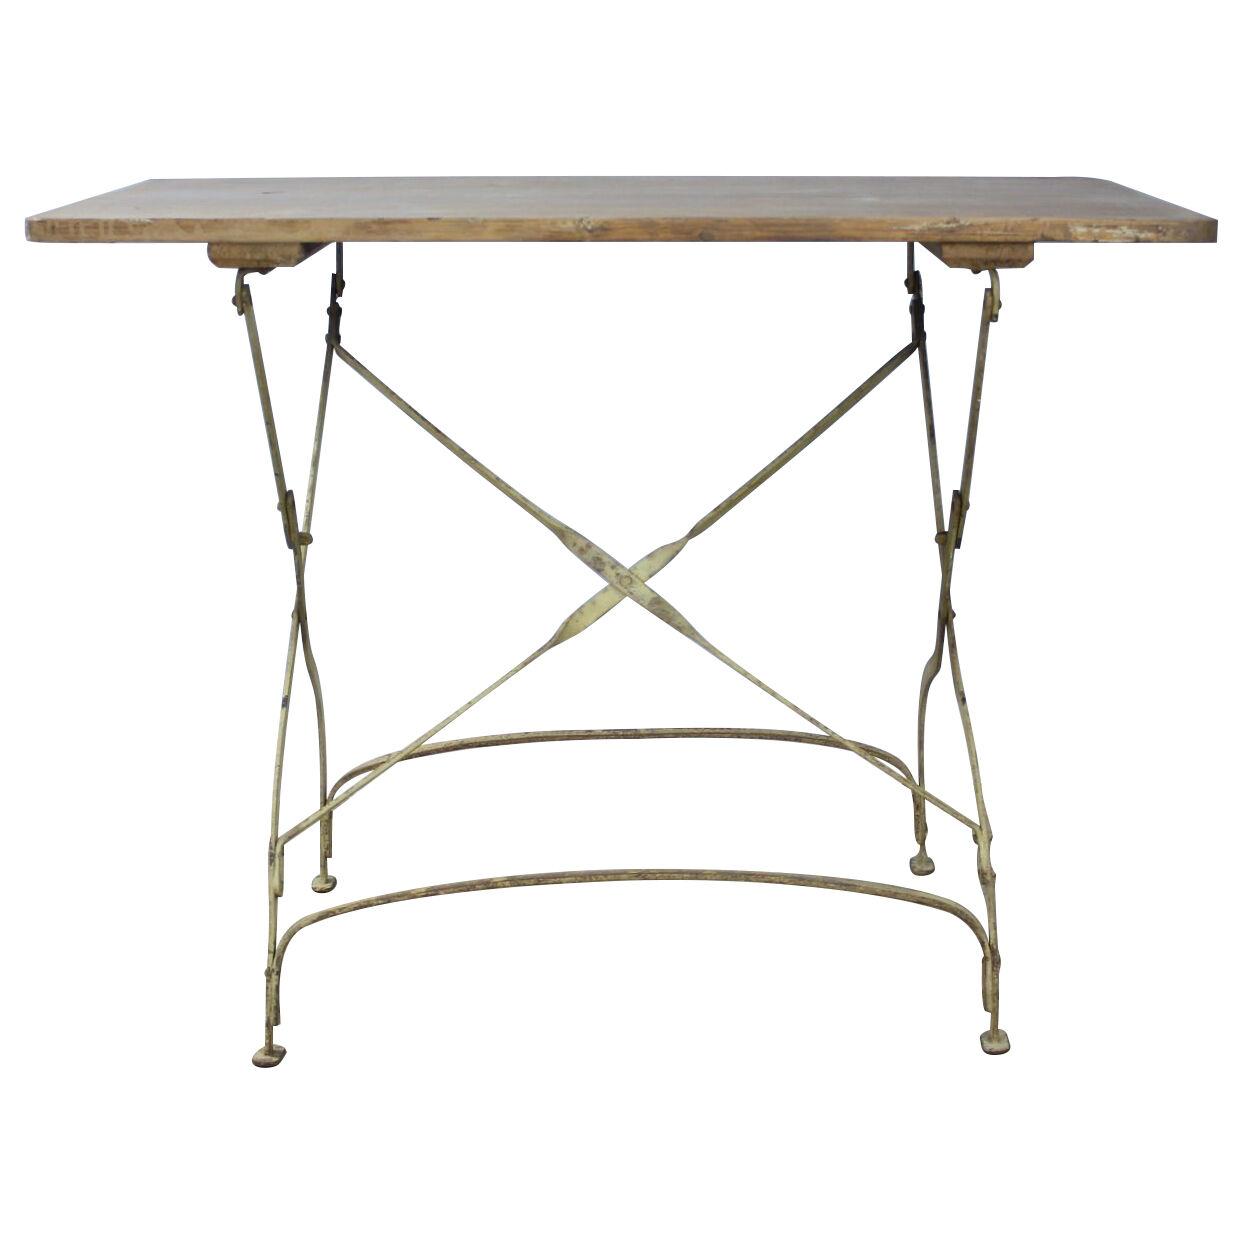 Antique French Painted Folding Table